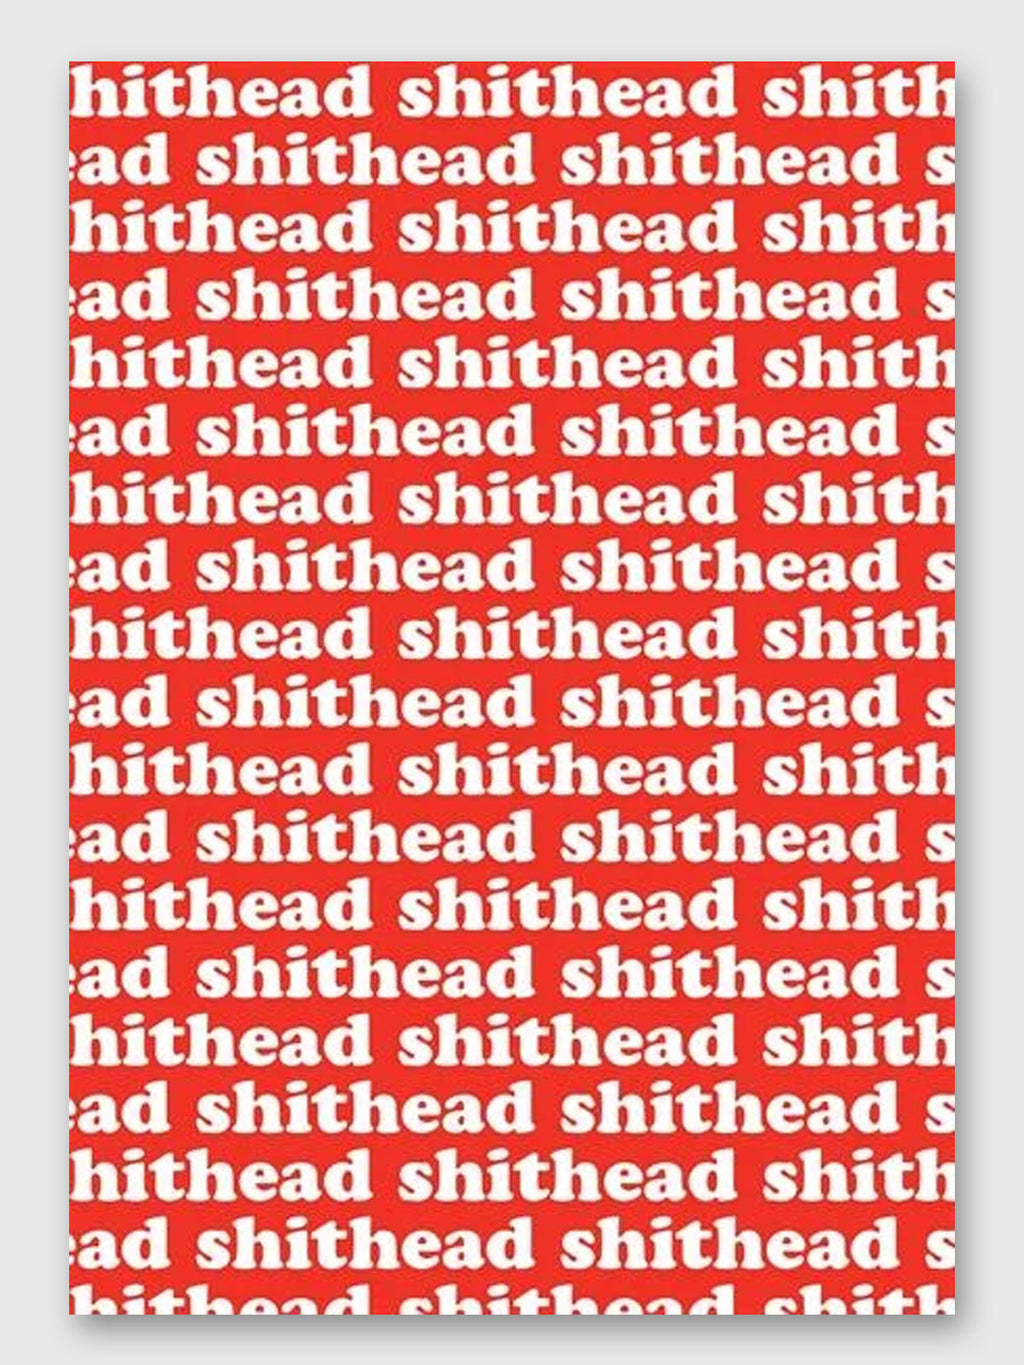 Rude Wrapping Paper - Shithead